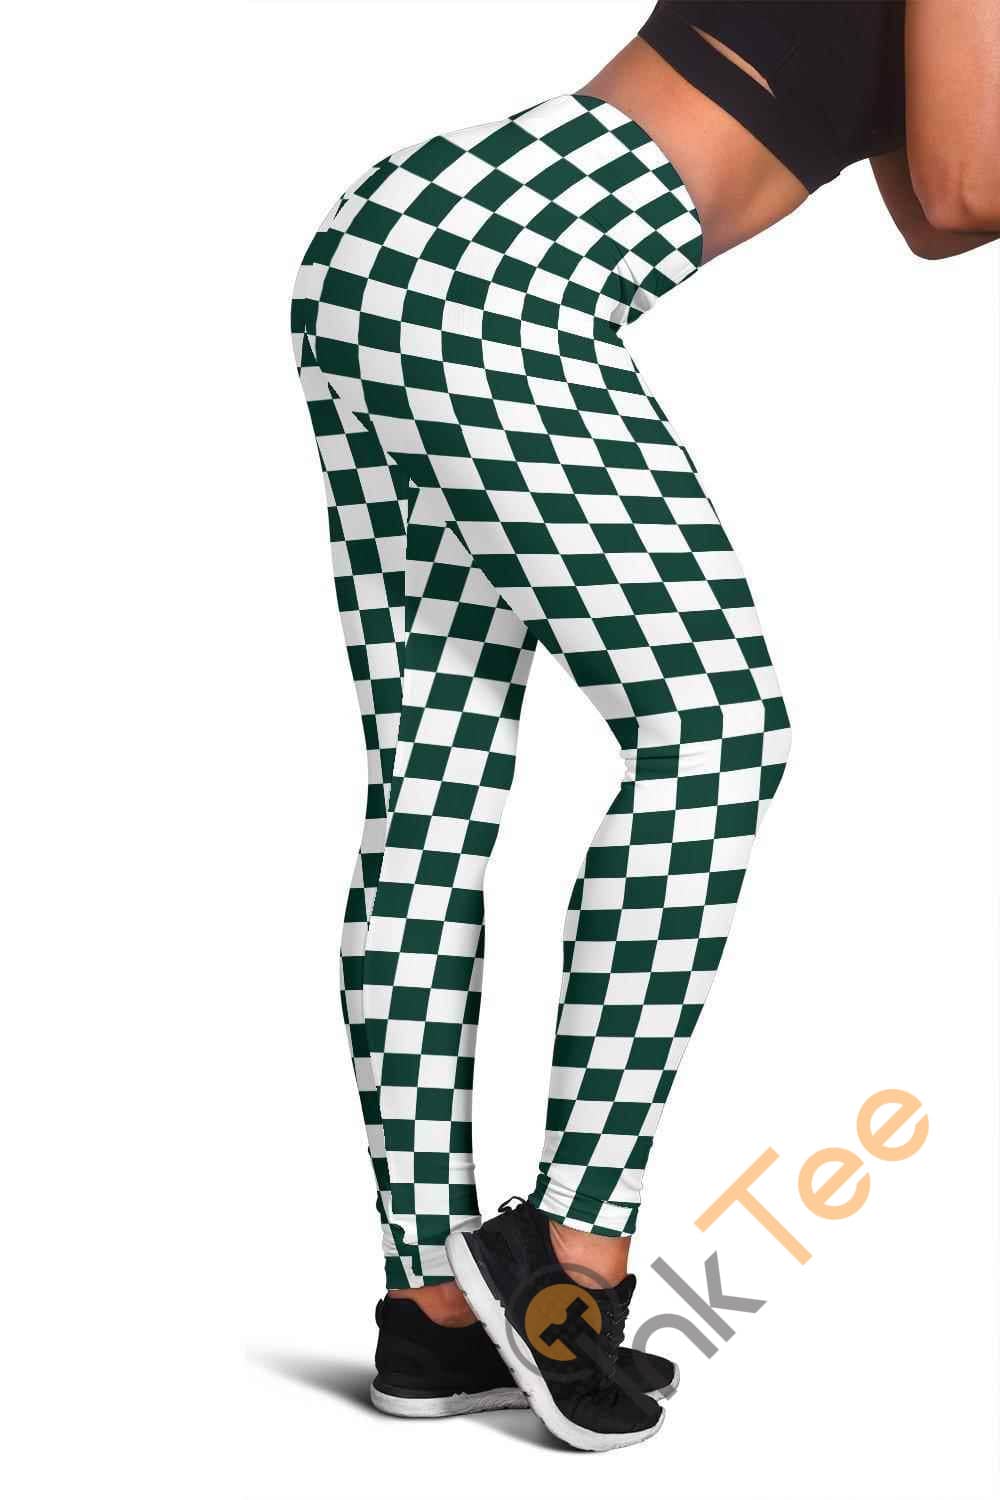 Inktee Store - Michigan State Spartans Fan Inspired 3D All Over Print For Yoga Fitness Checkers Women'S Leggings Image